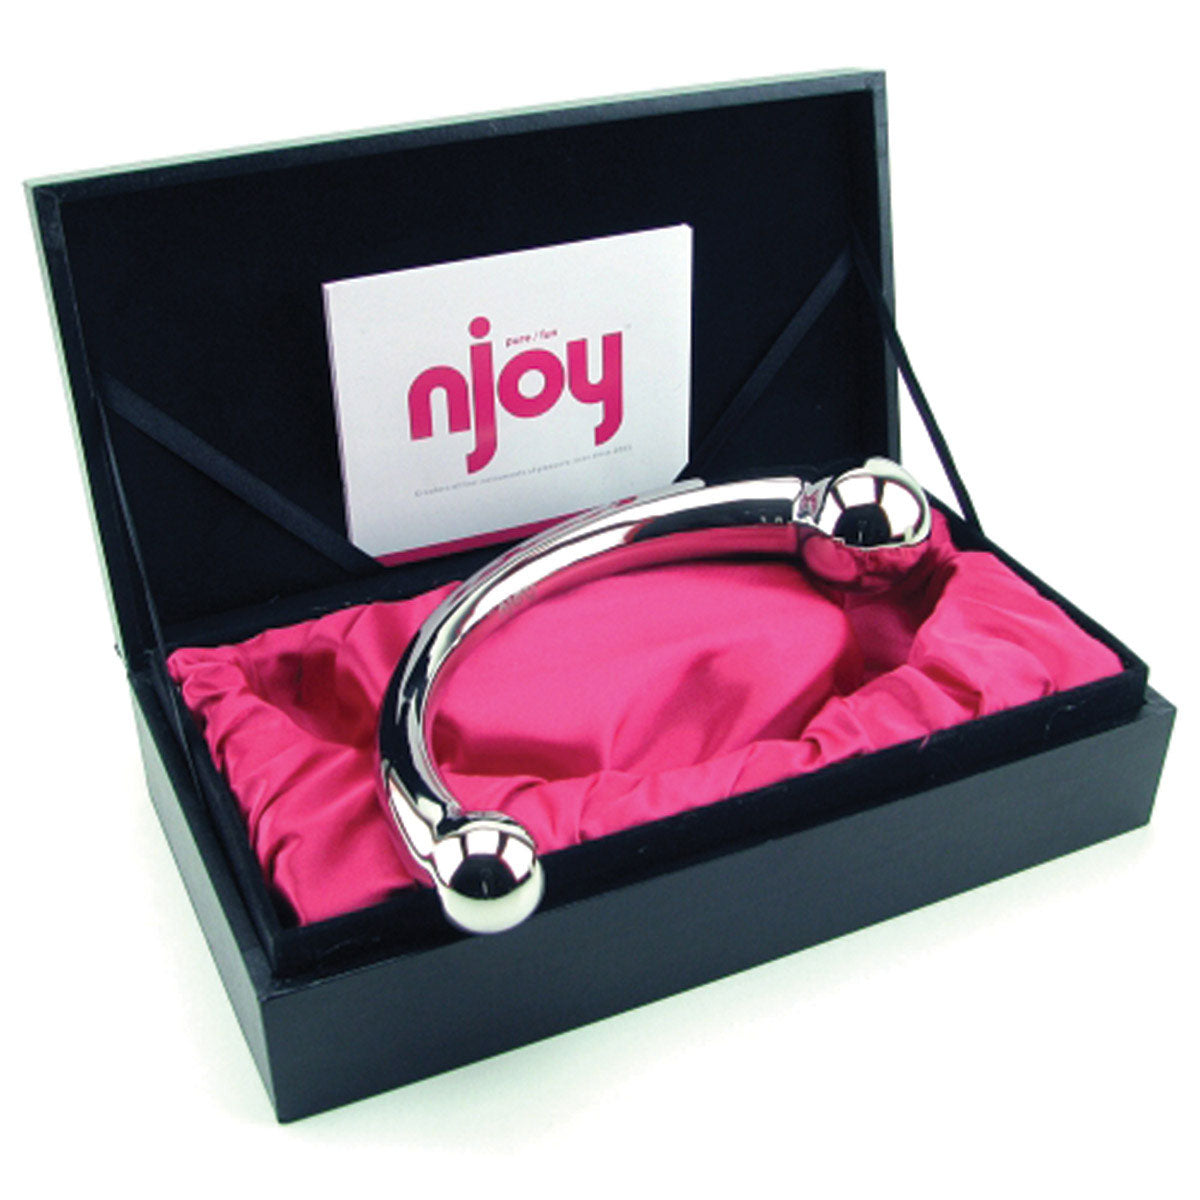 njoy Pure Stainless Steel Wand